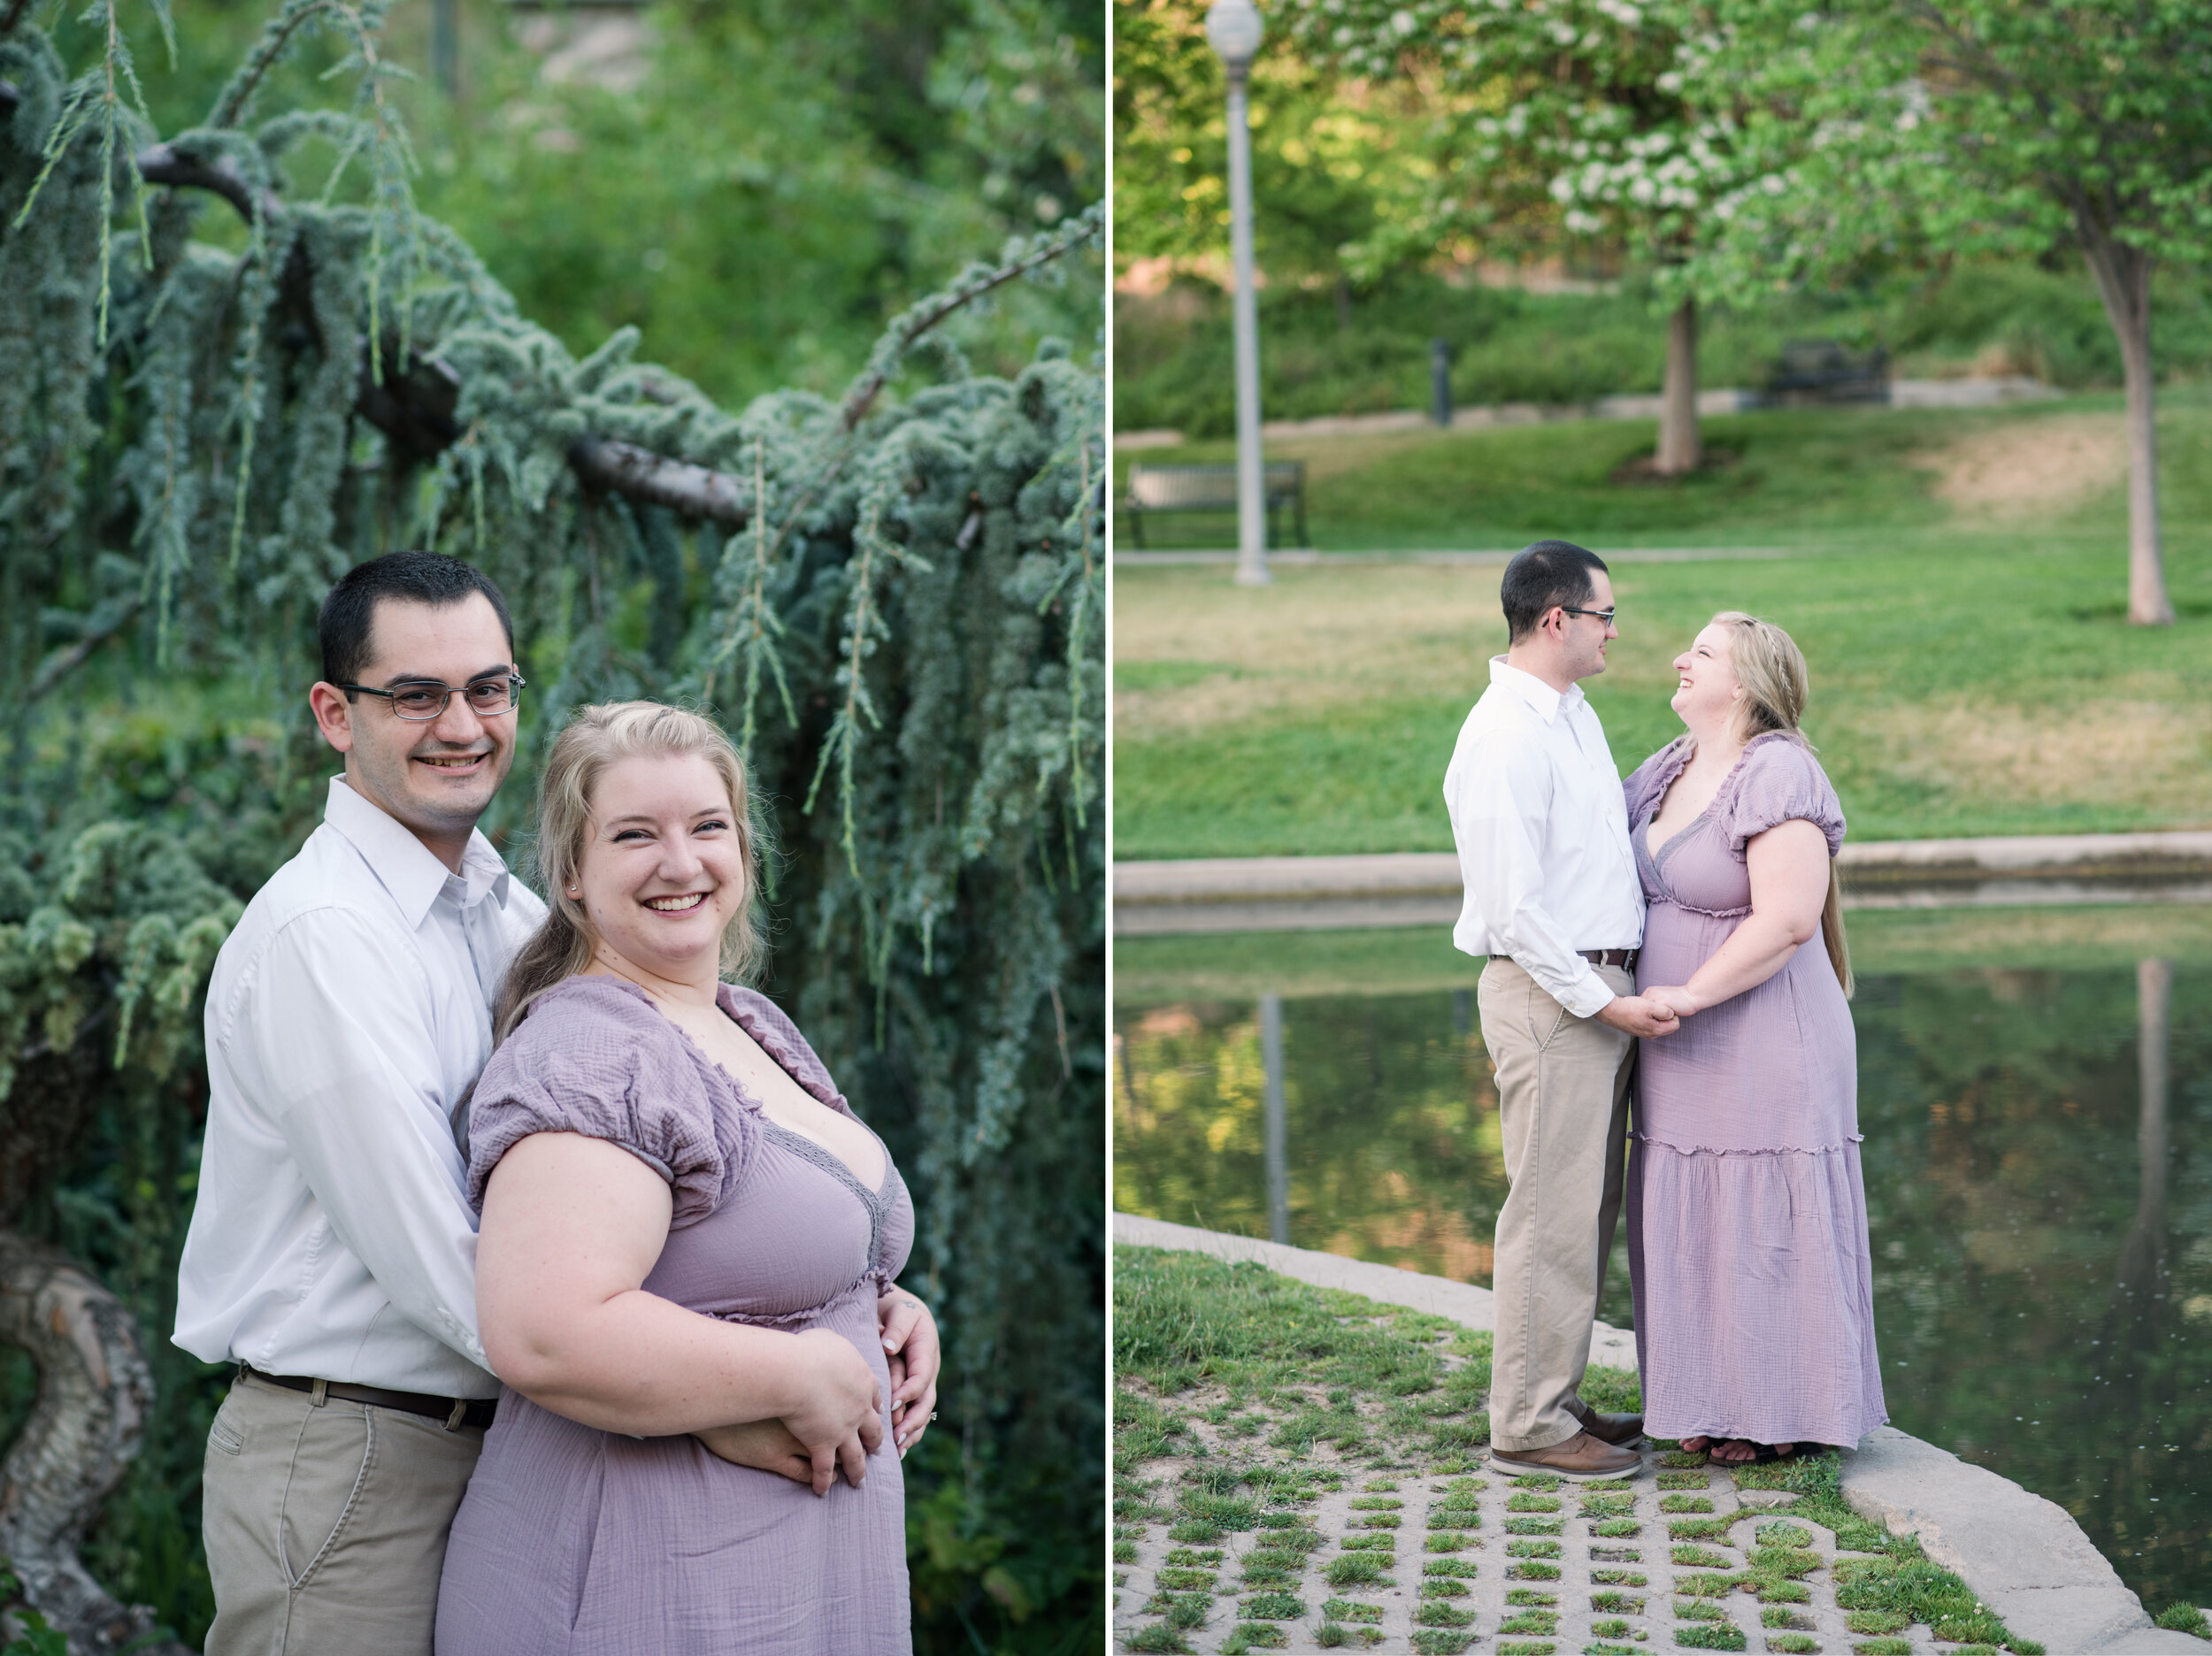 Utah_Wedding_Photographer_Engagement_Portraits_Cathedral_of_the_Madeline_Memory_Grove_Park 3.jpg